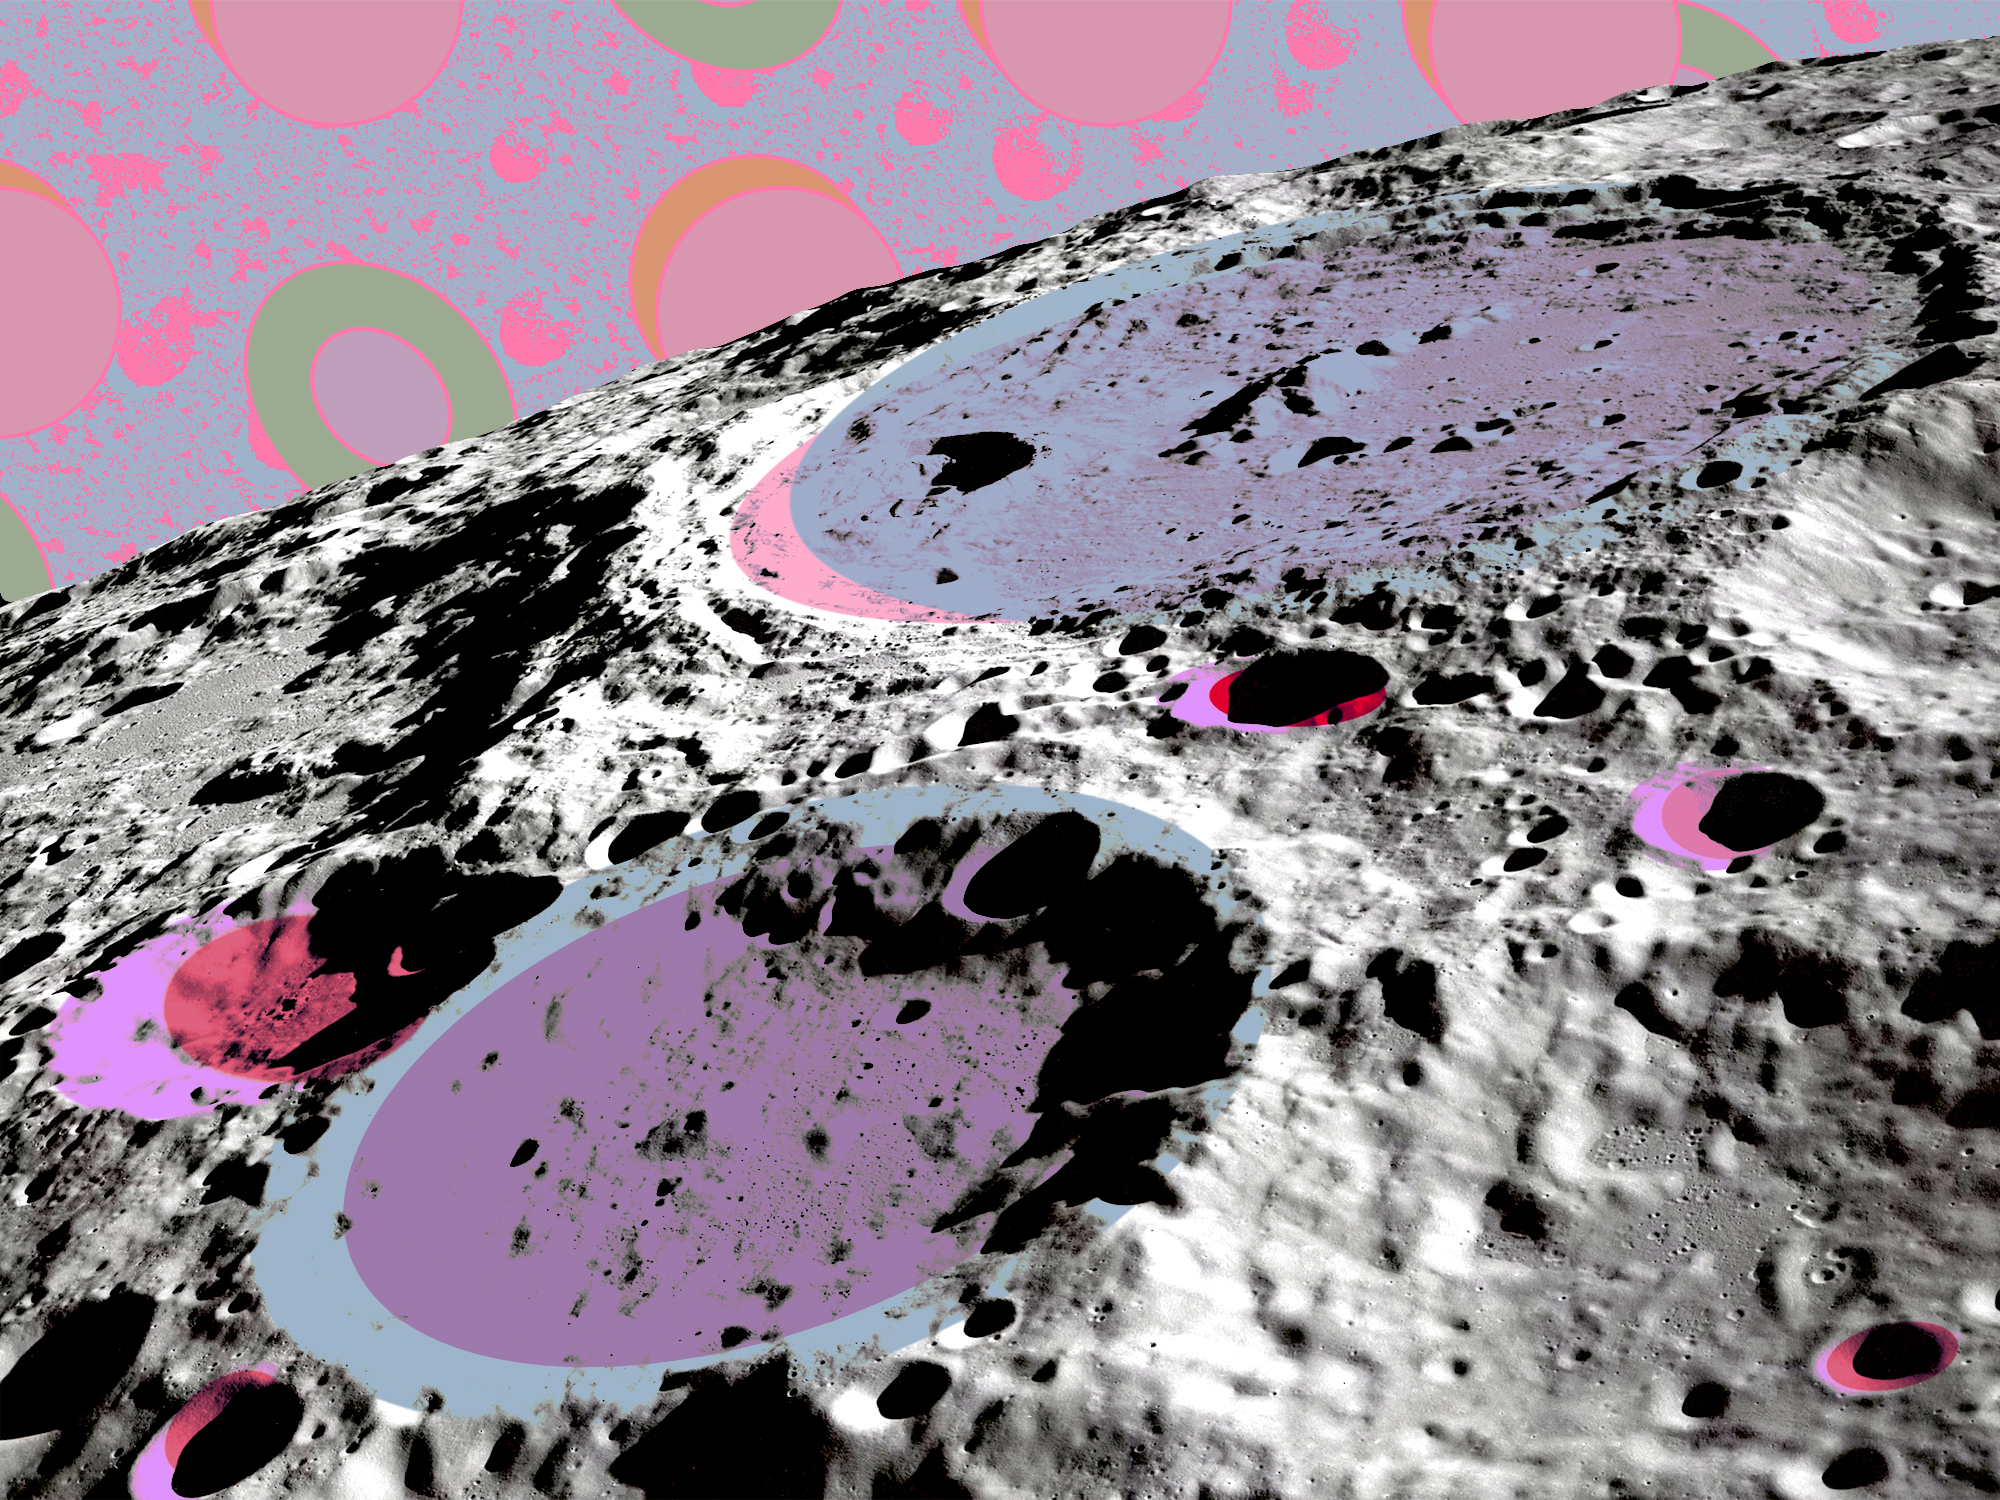 Why it’s hard to tell if moon craters are holes or bumps